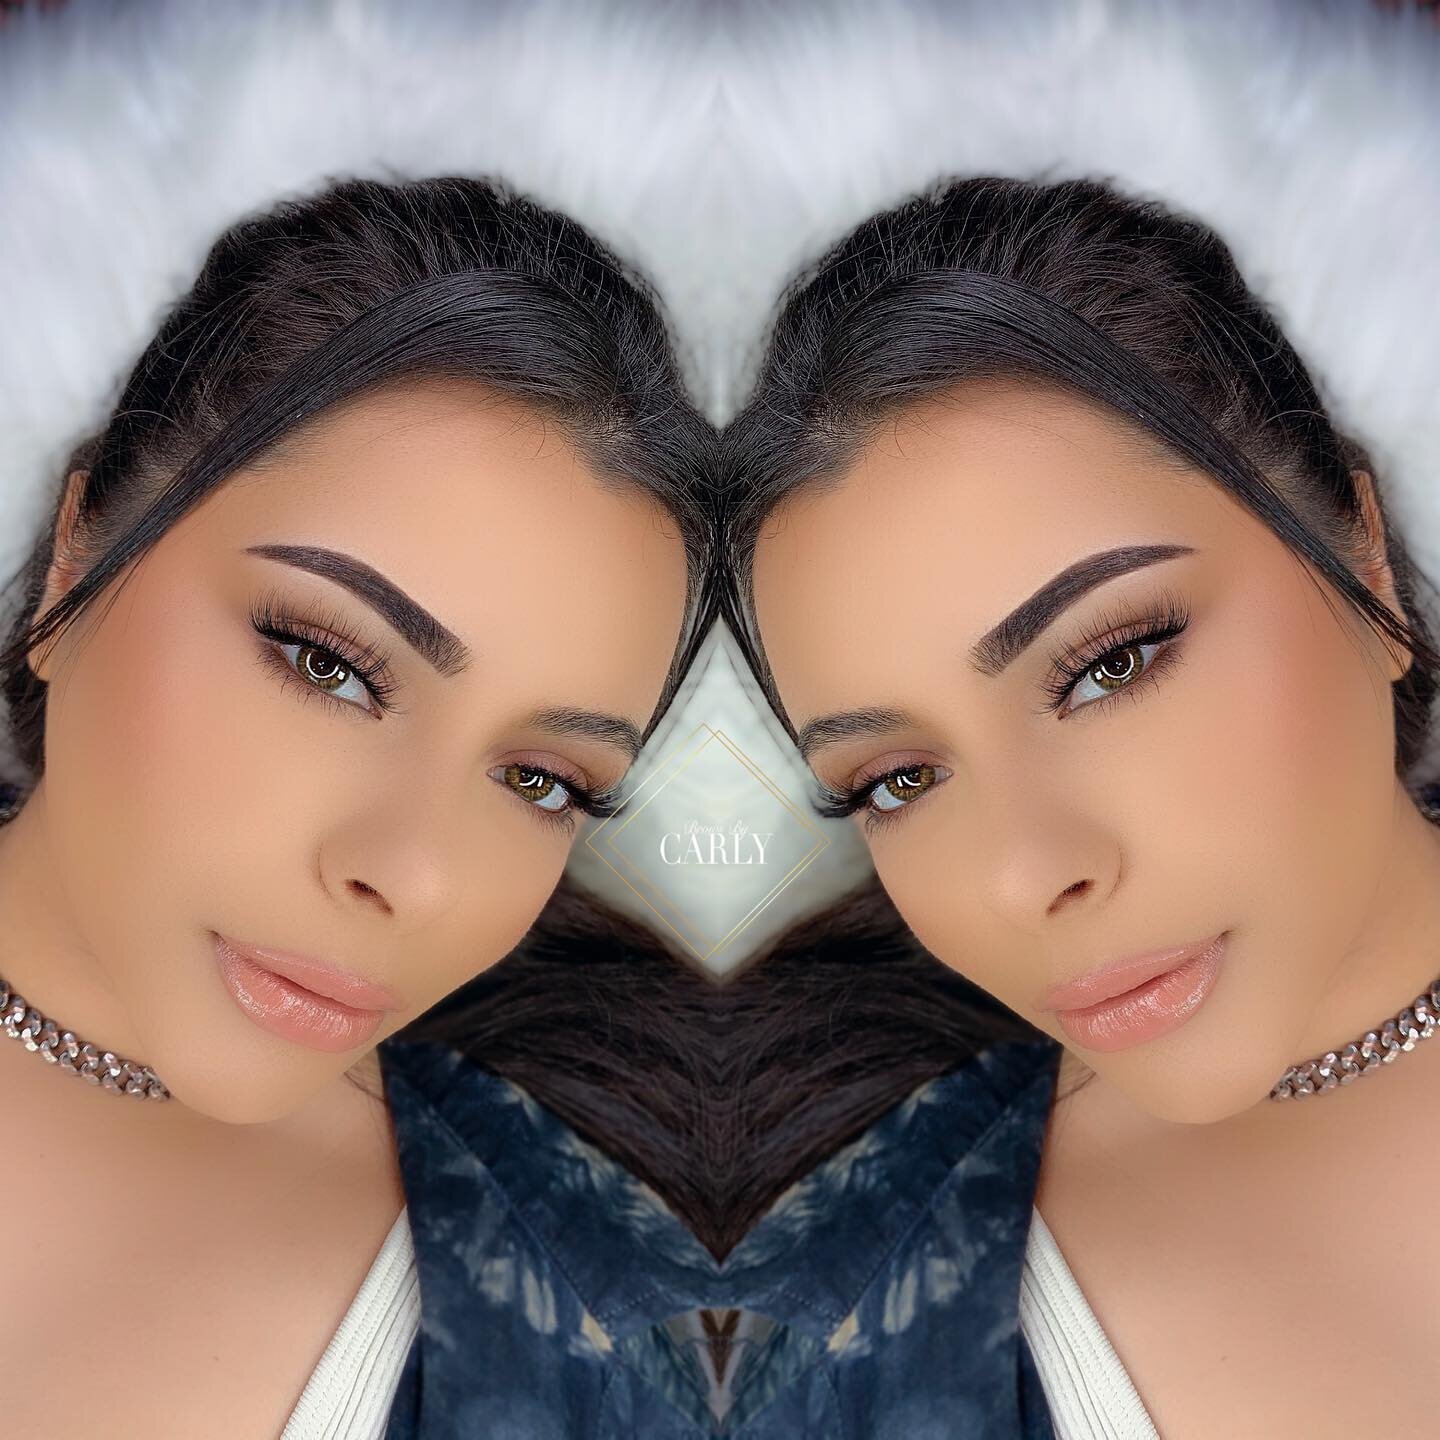 Seeing double 👀👀

Artist: @browsbycarly_  Predrawing ✨
______________________________________
𝐔𝐏𝐂𝐎𝐌𝐈𝐍𝐆 𝐓𝐑𝐀𝐈𝐍𝐈𝐍𝐆 𝐃𝐀𝐓𝐄𝐒:
&bull;December 10th-12th (Ombr&eacute; brows, Microblading/Microshading 

Full kit, certification &amp; 3 mo